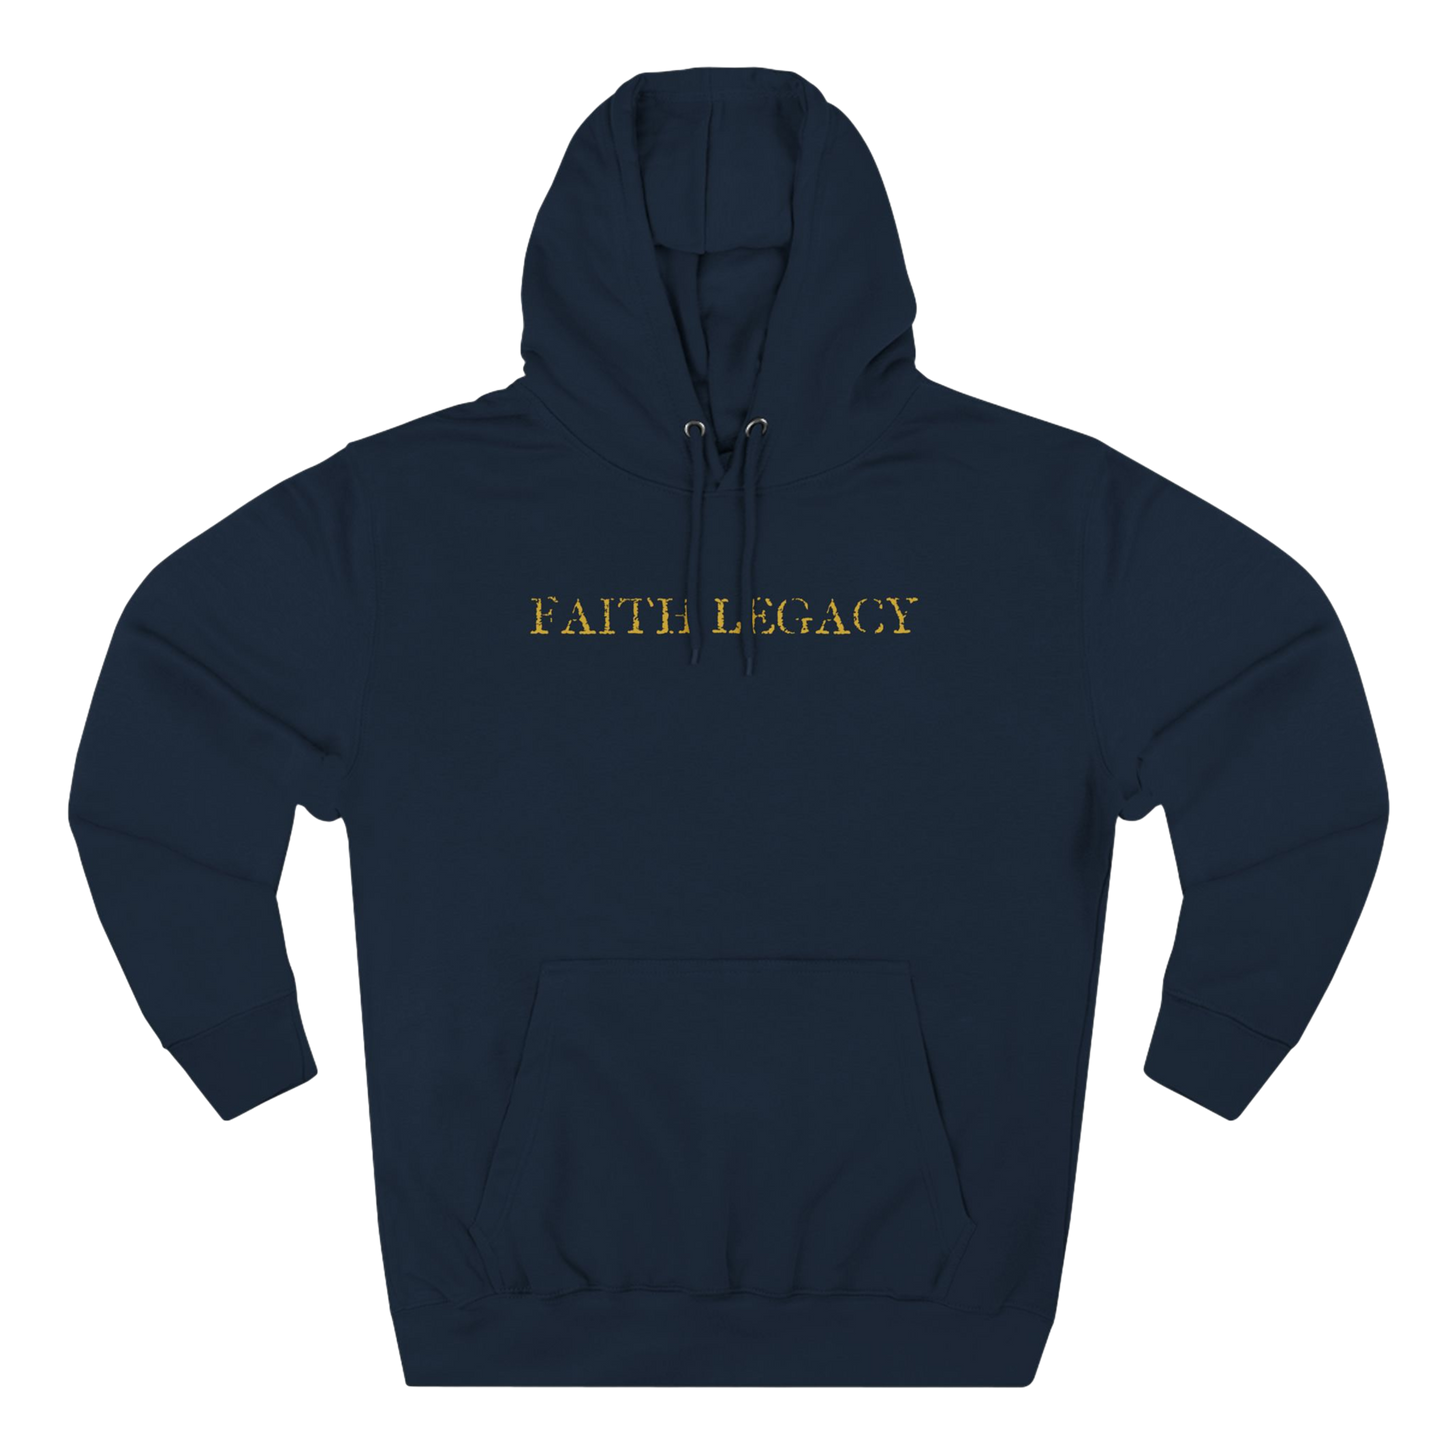 BoundlessFaith - To Live is Christ, To Die is Gain - Christian Apparel Hoodie BLUE - TRUE Apparel of God